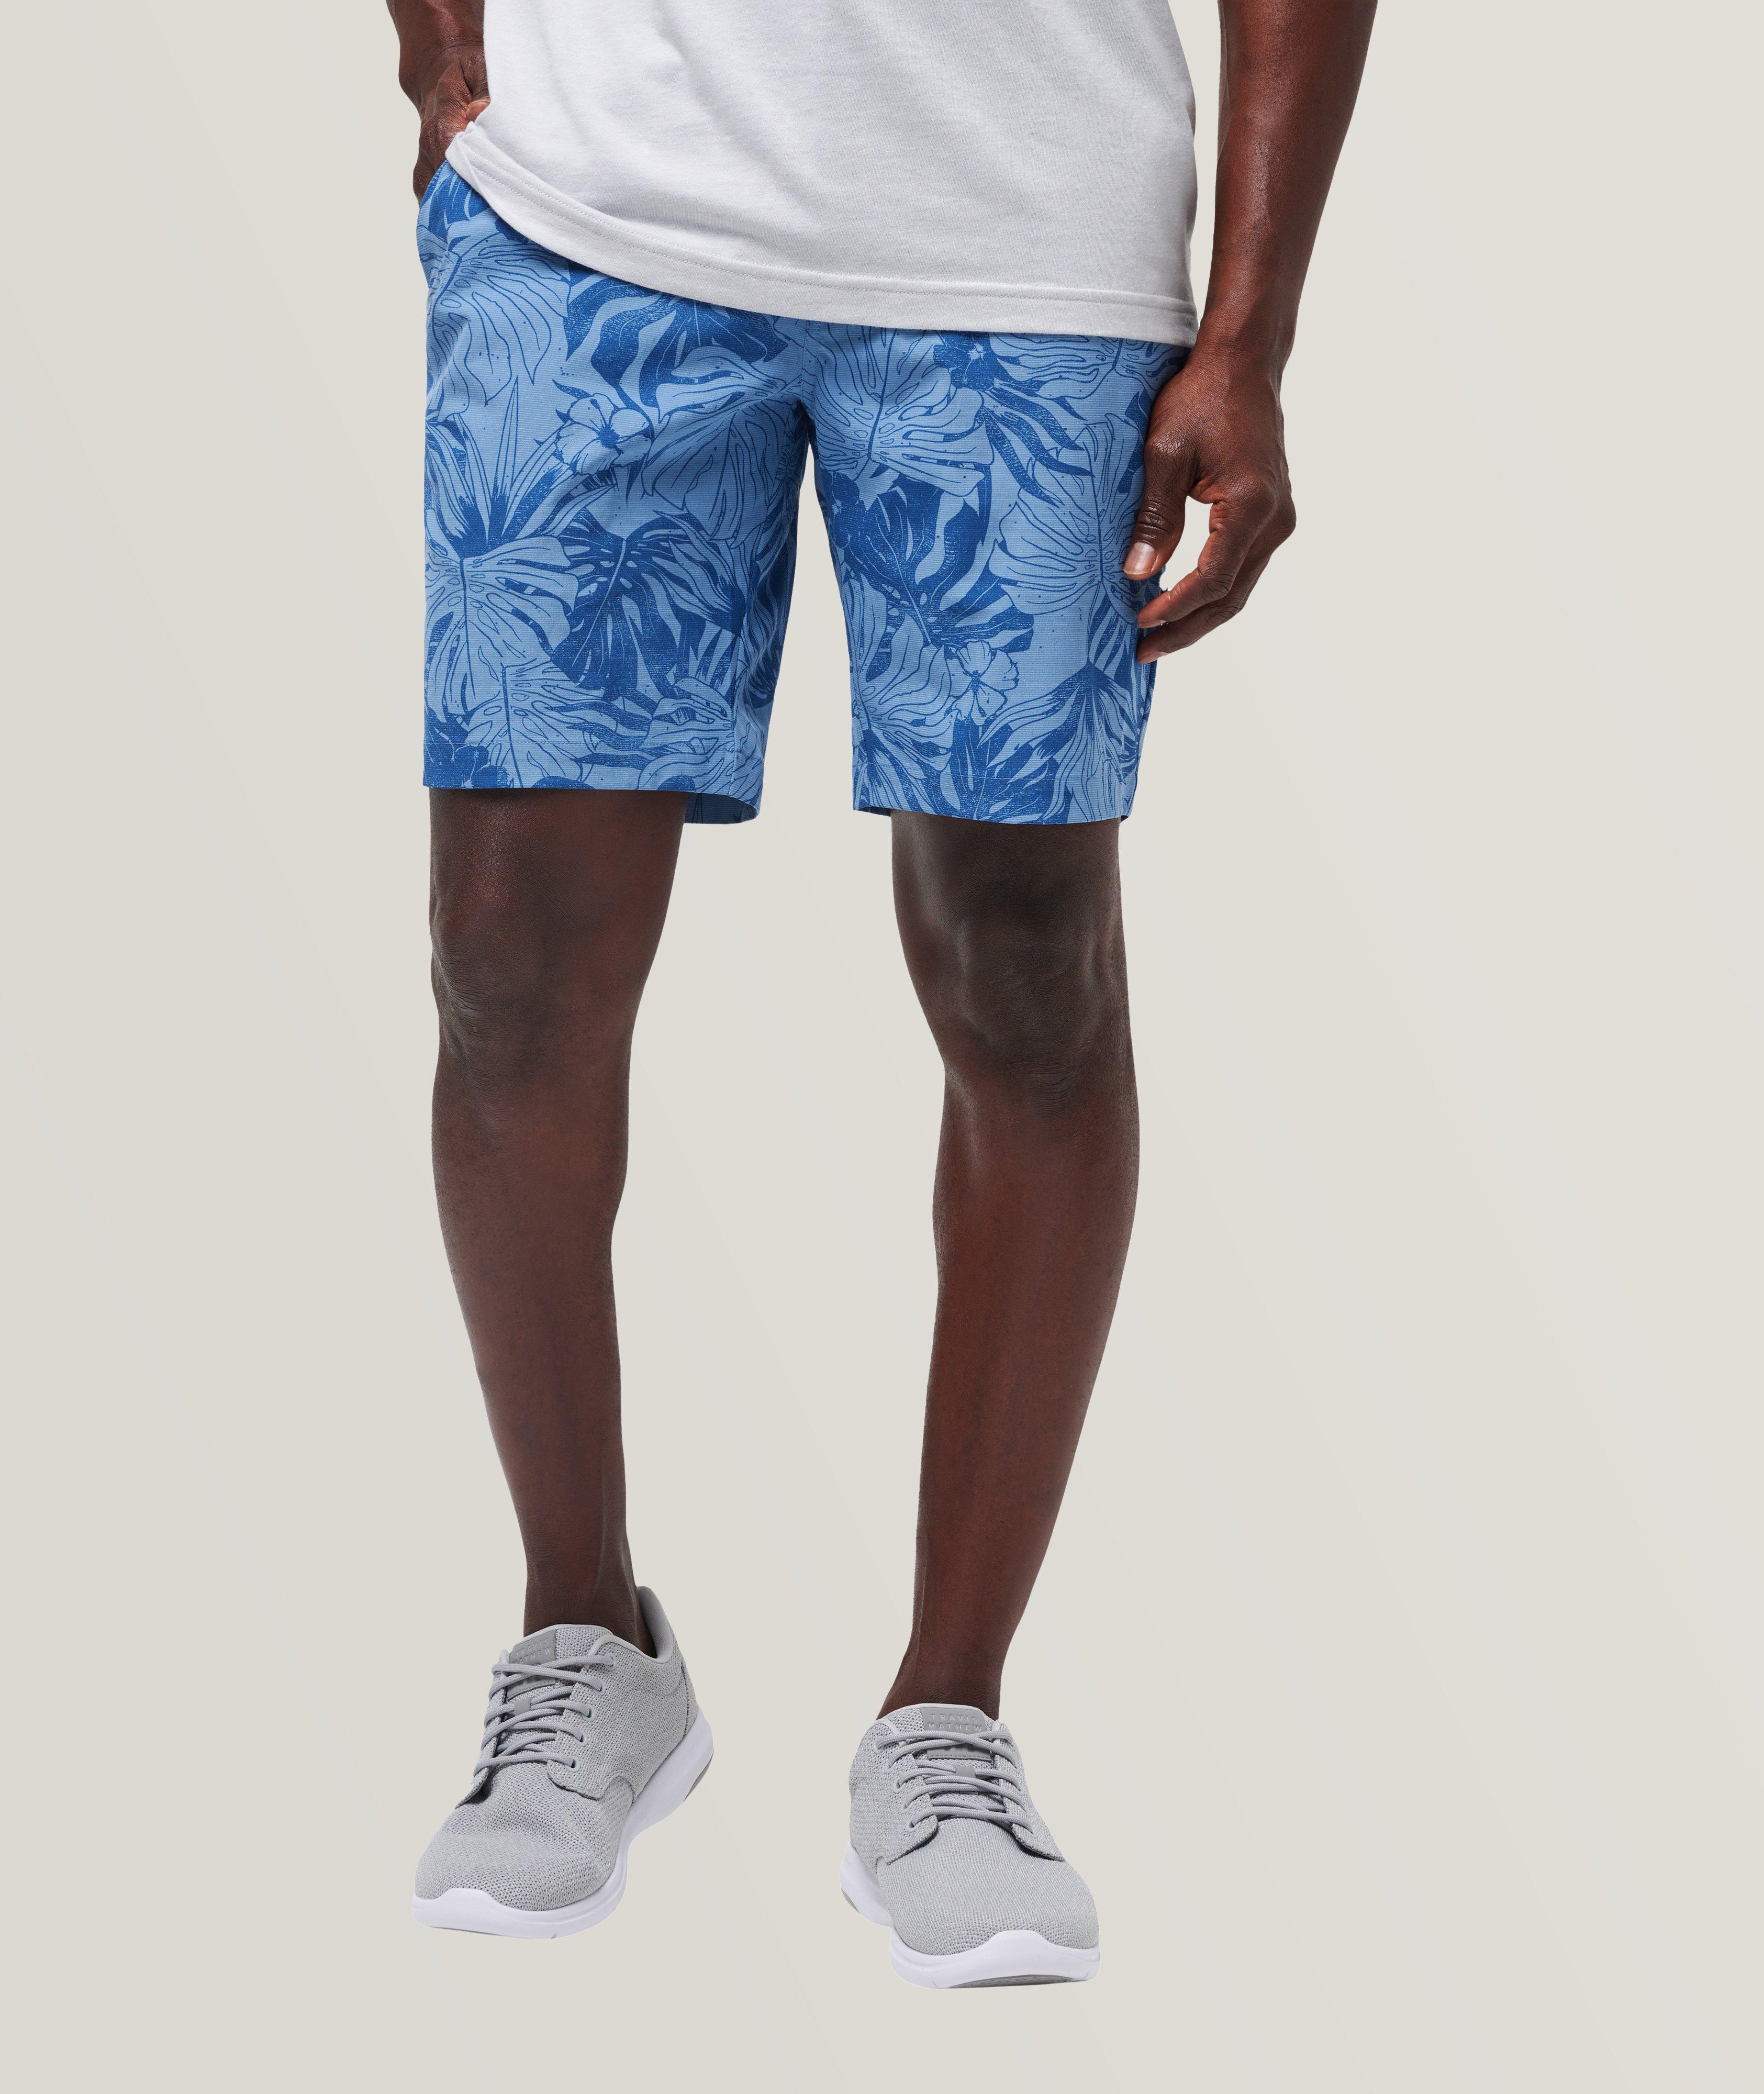 Eco Collection Ankle Pounders Shorts image 0